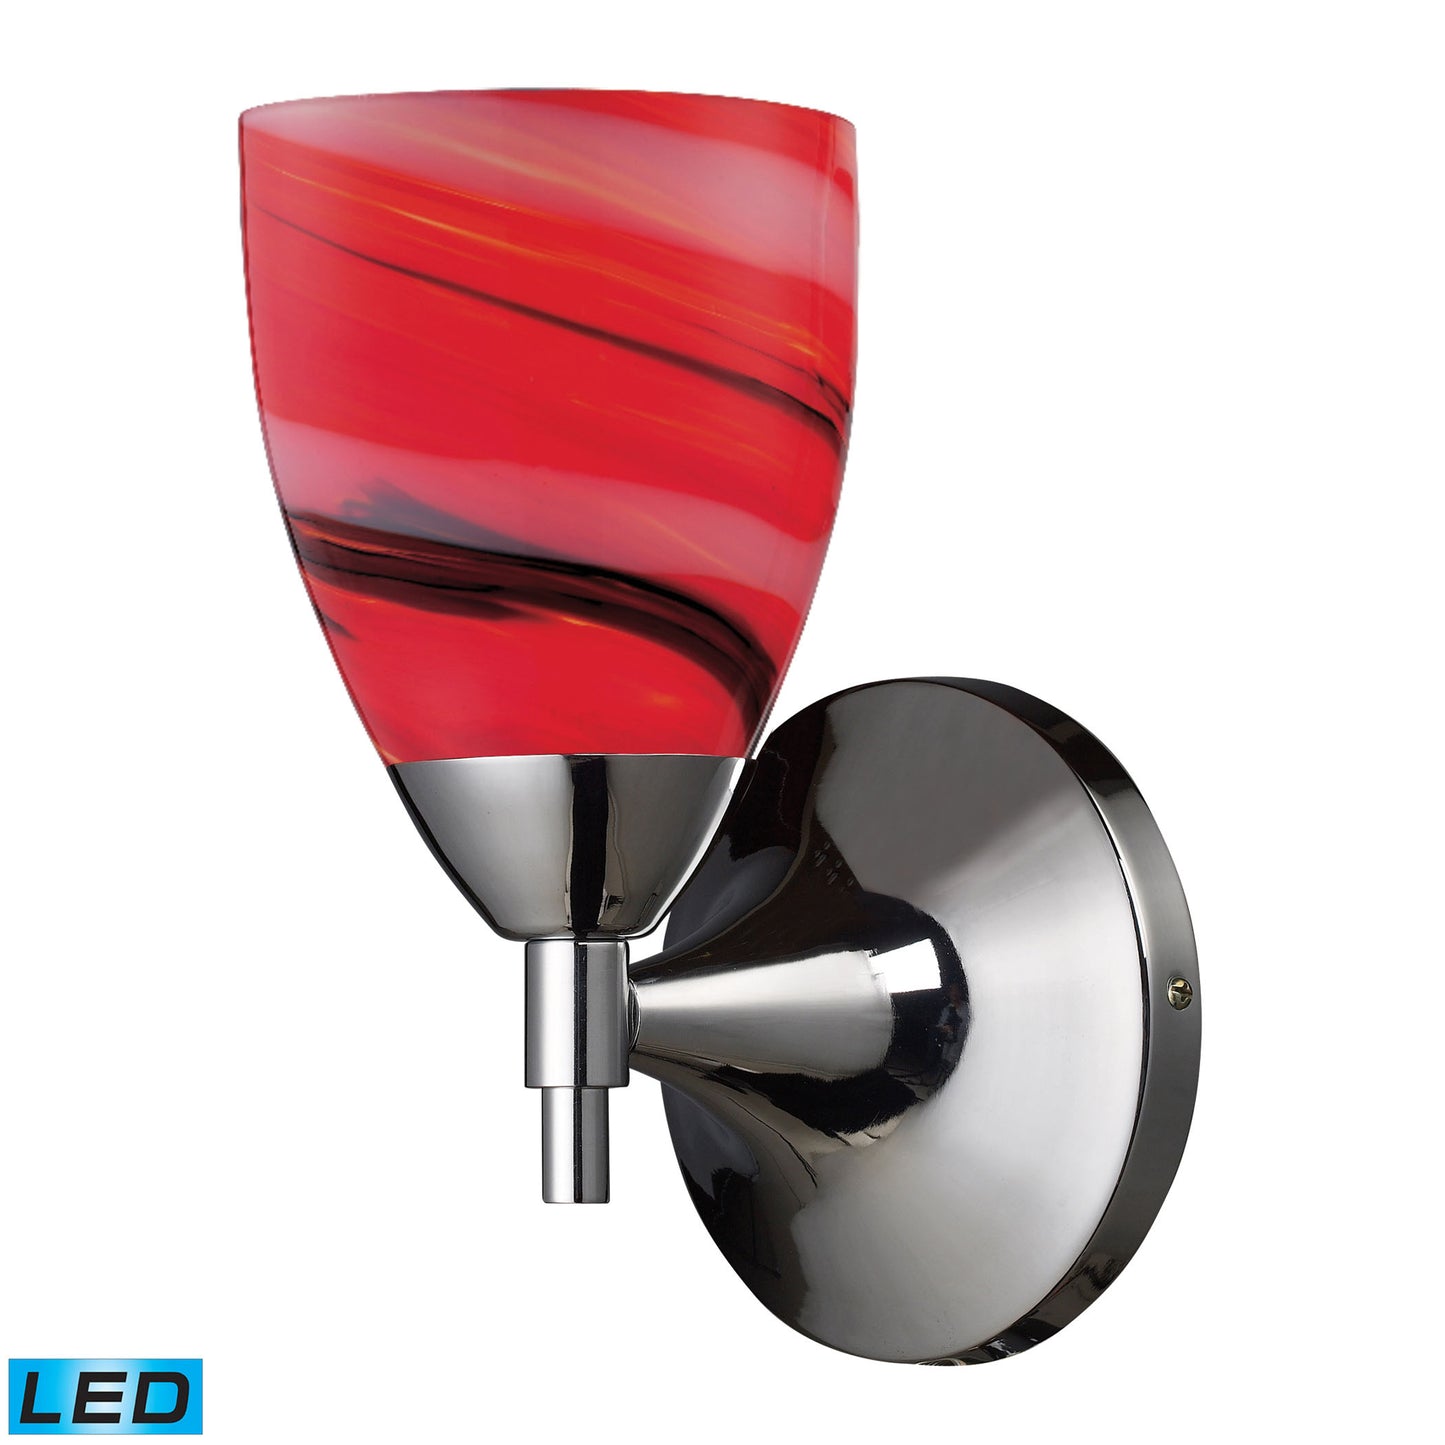 Celina 1-Light Wall Lamp in Polished Chrome with Sandy Swirled Glass - Includes LED Bulb